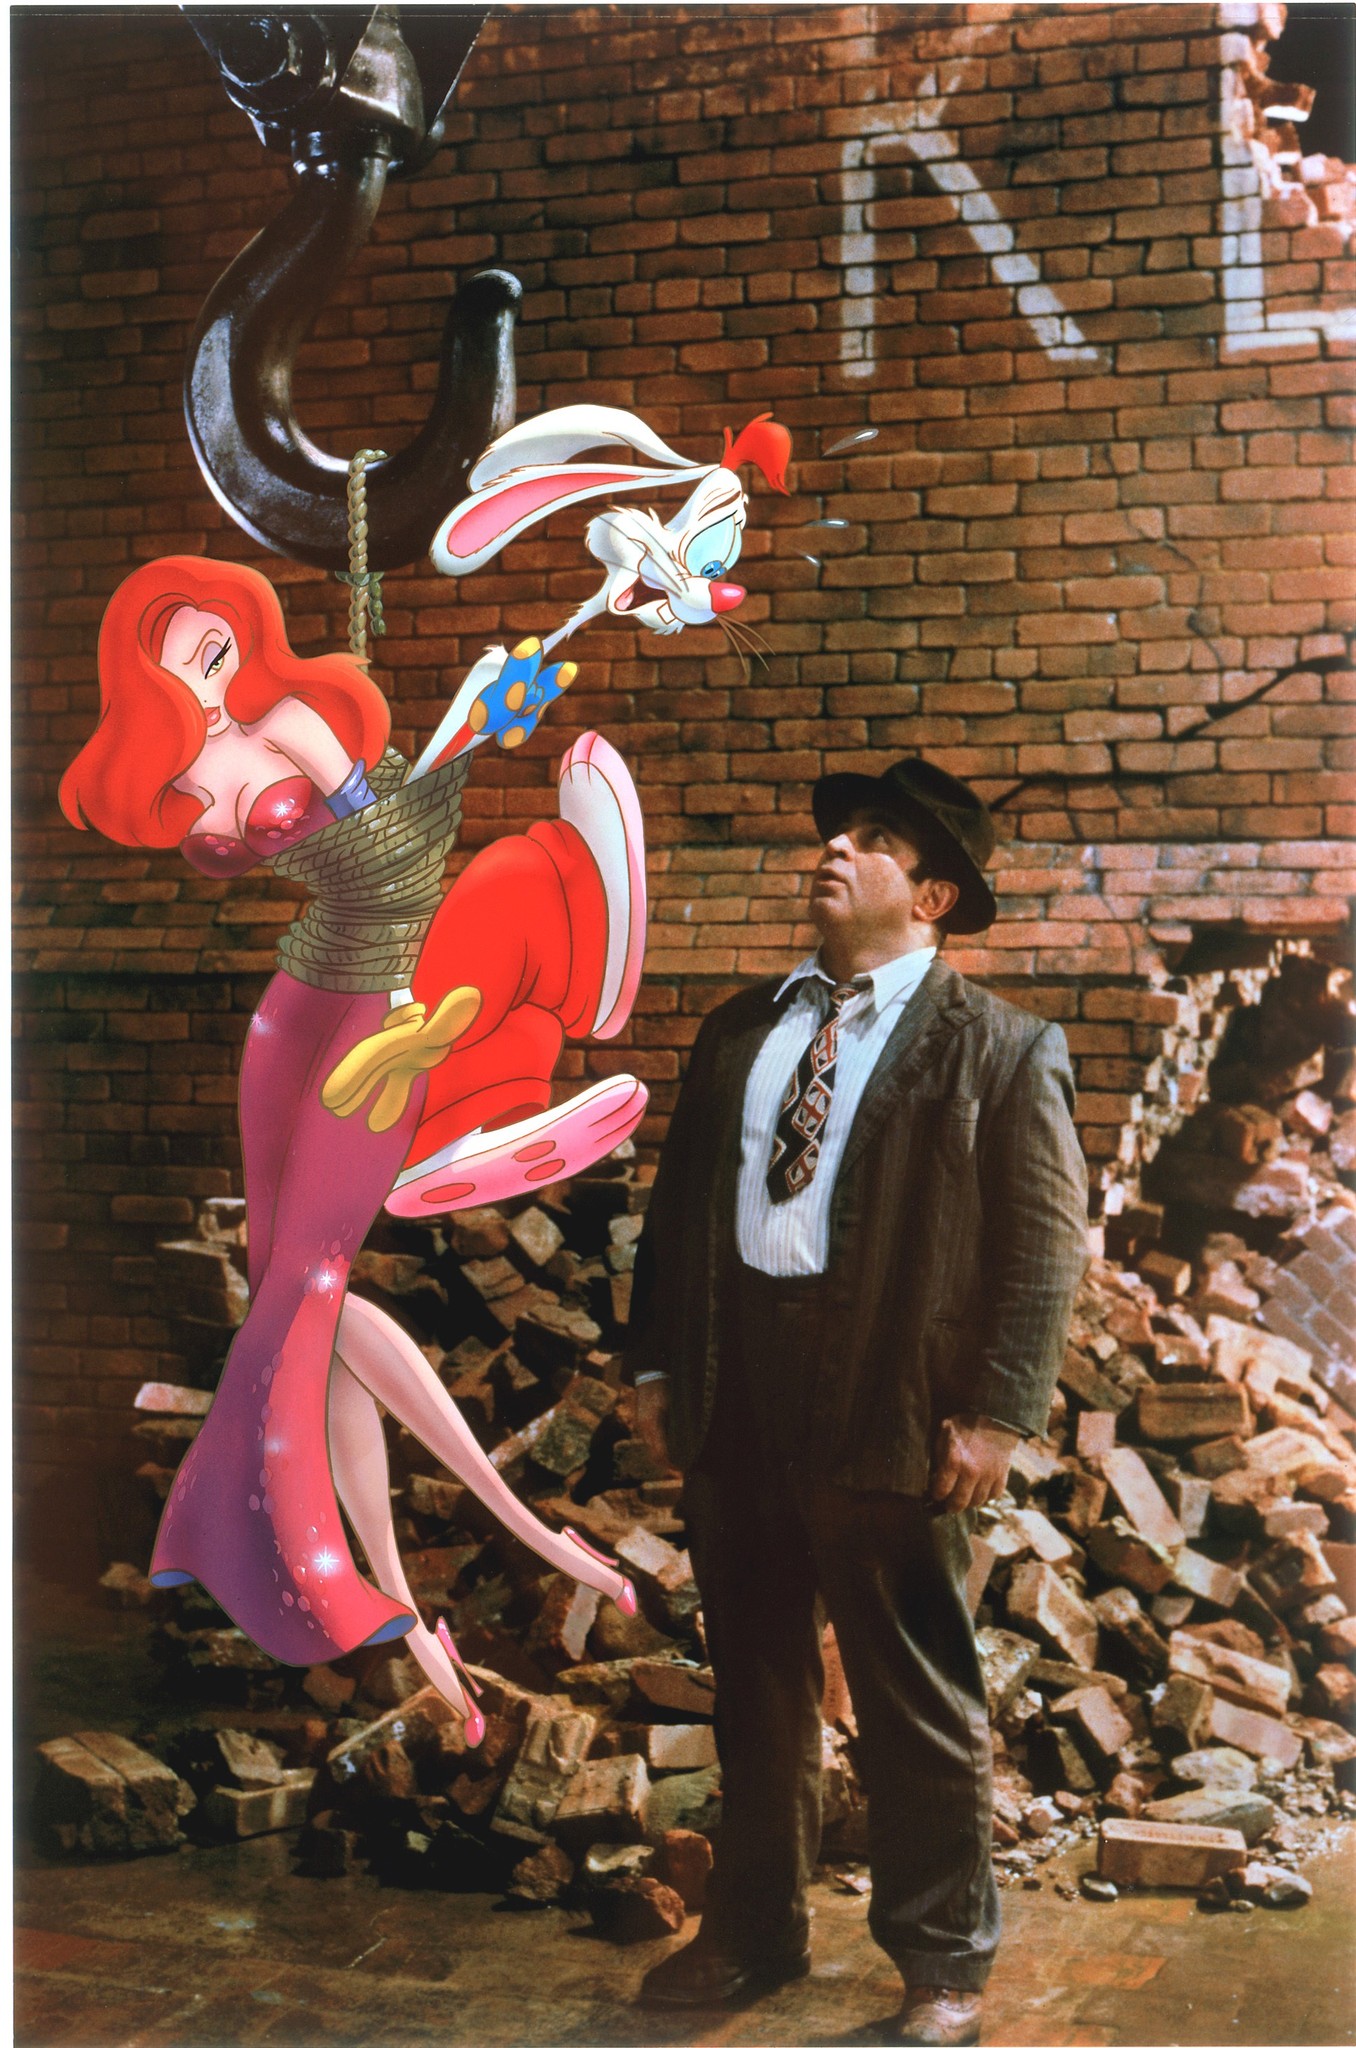 avi zar add photo pictures of jessica rabbit and roger rabbit